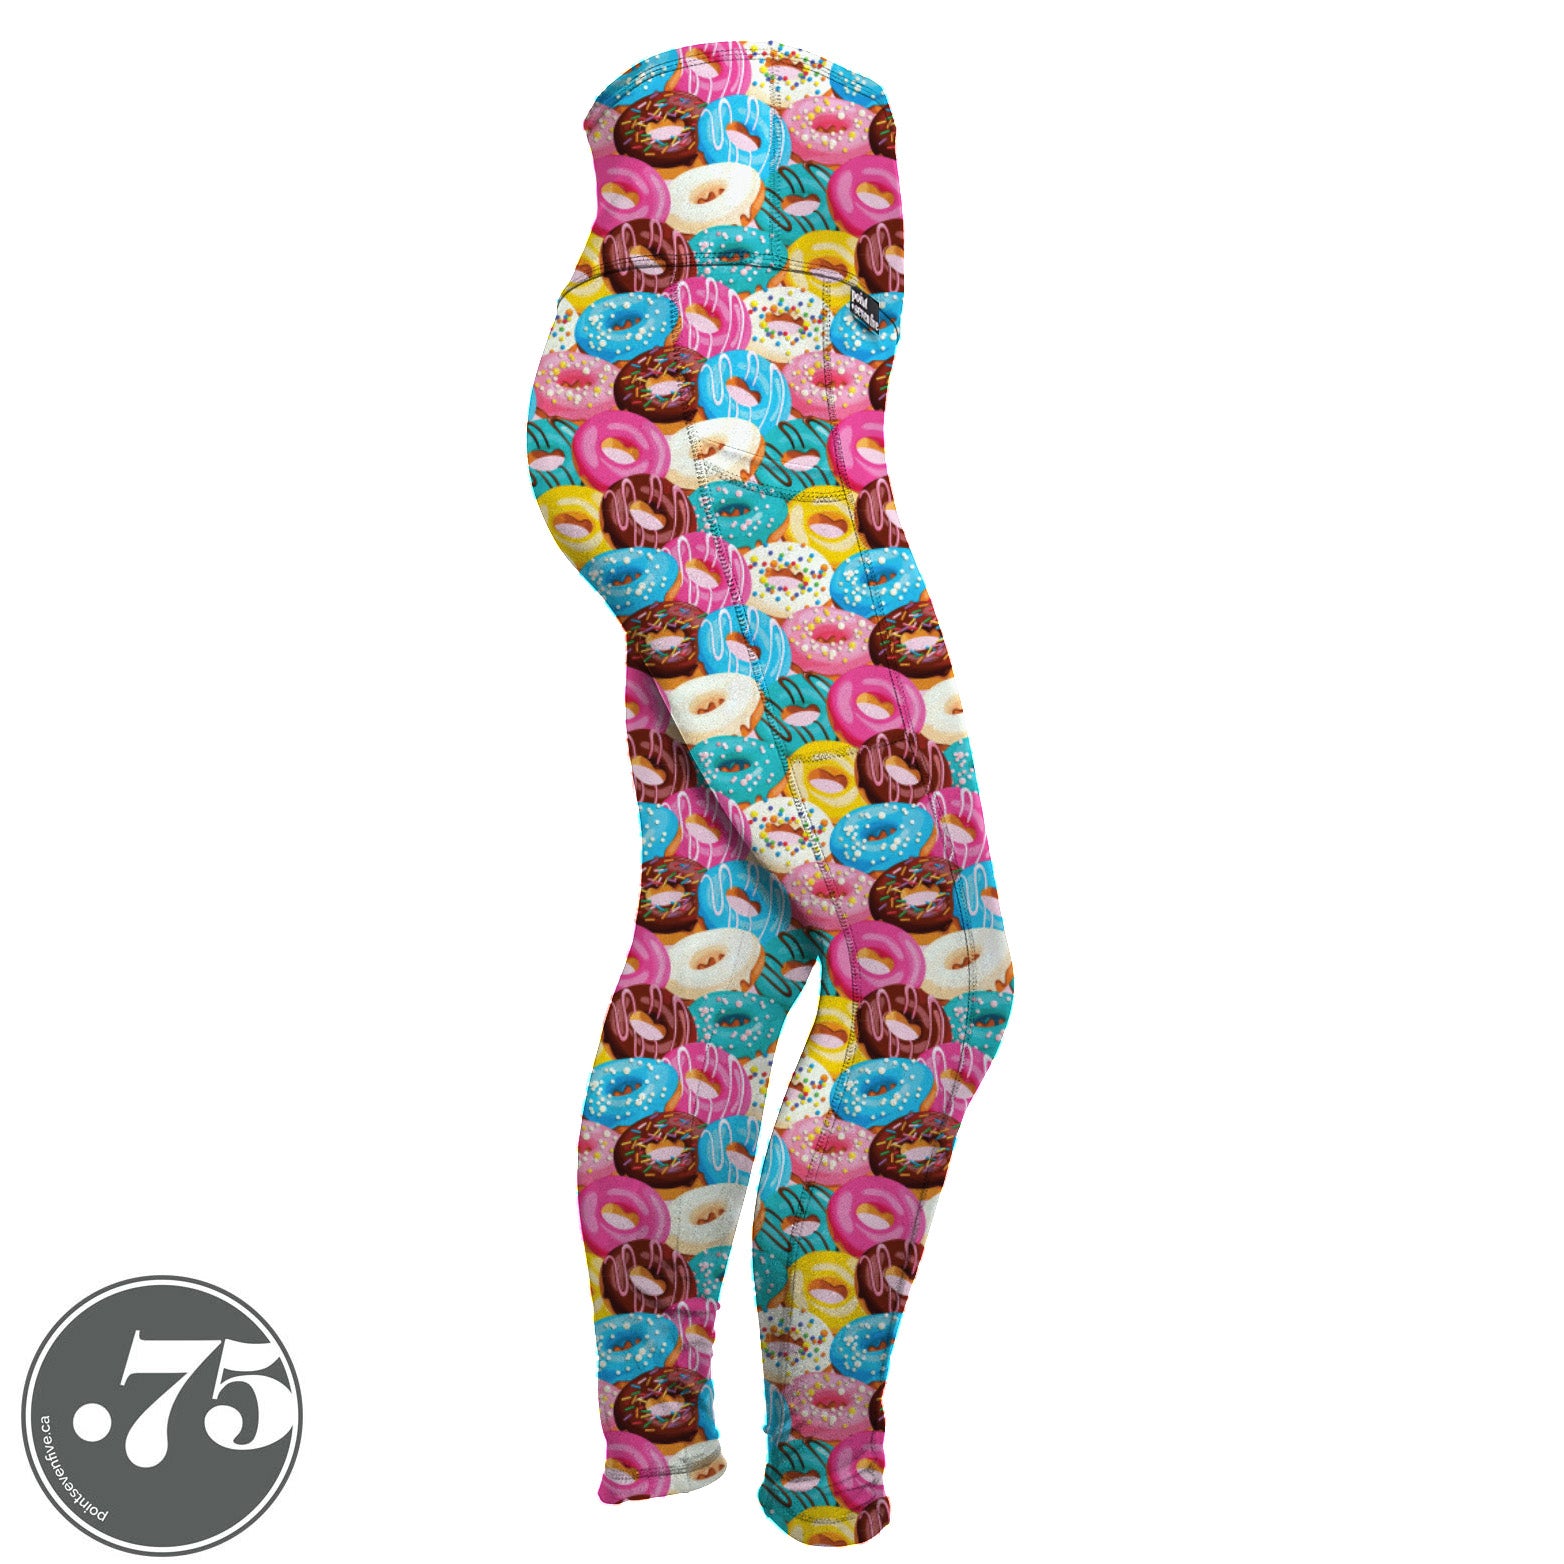 High-waisted, spandex Full Length pocket leggings. The fabric is illustrated donuts with icing in pastel shades of blue, aqua, pink, yellow, white and brown.